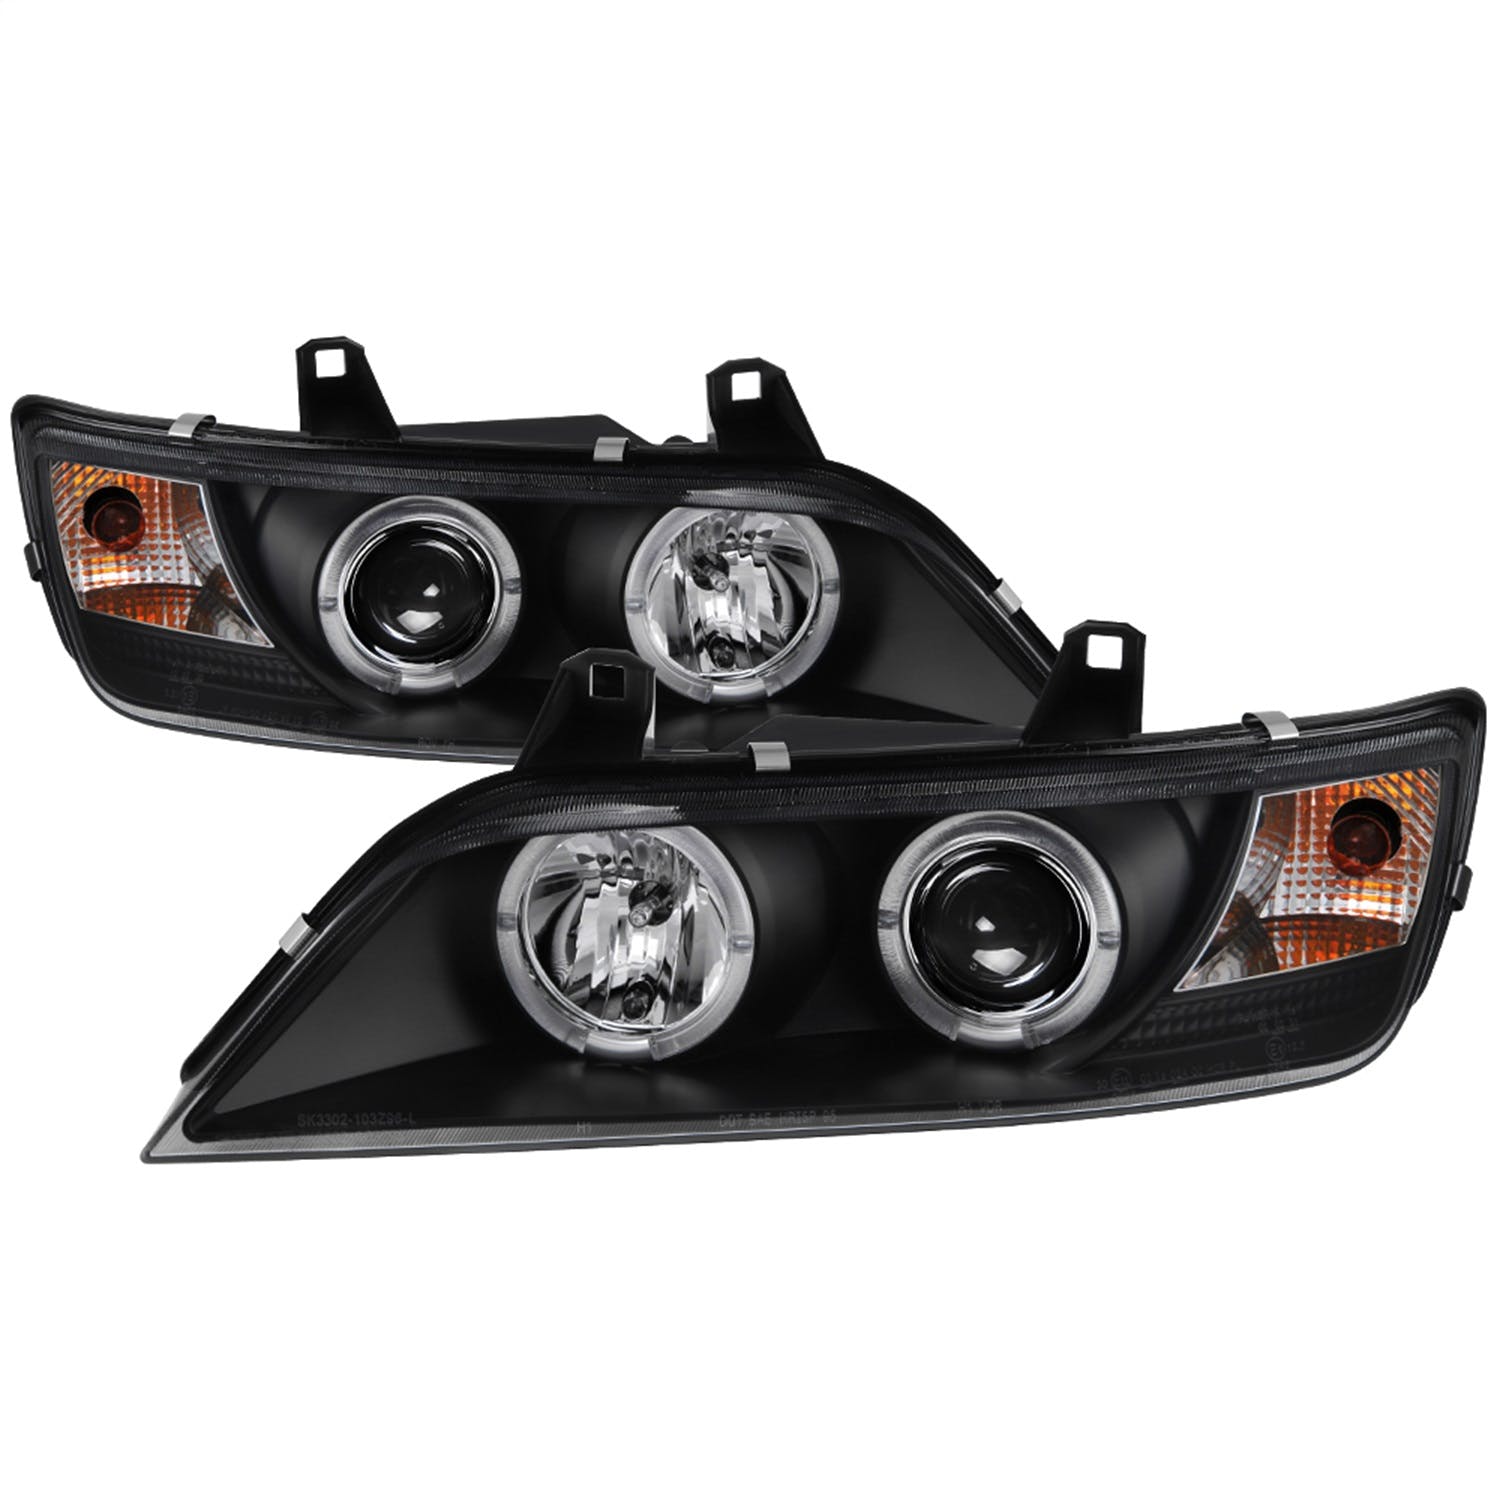 Spyder Auto 5009081 (Spyder) BMW Z3 96-02 Projector Headlights-LED Halo-Black-High H1 (Included)-Low